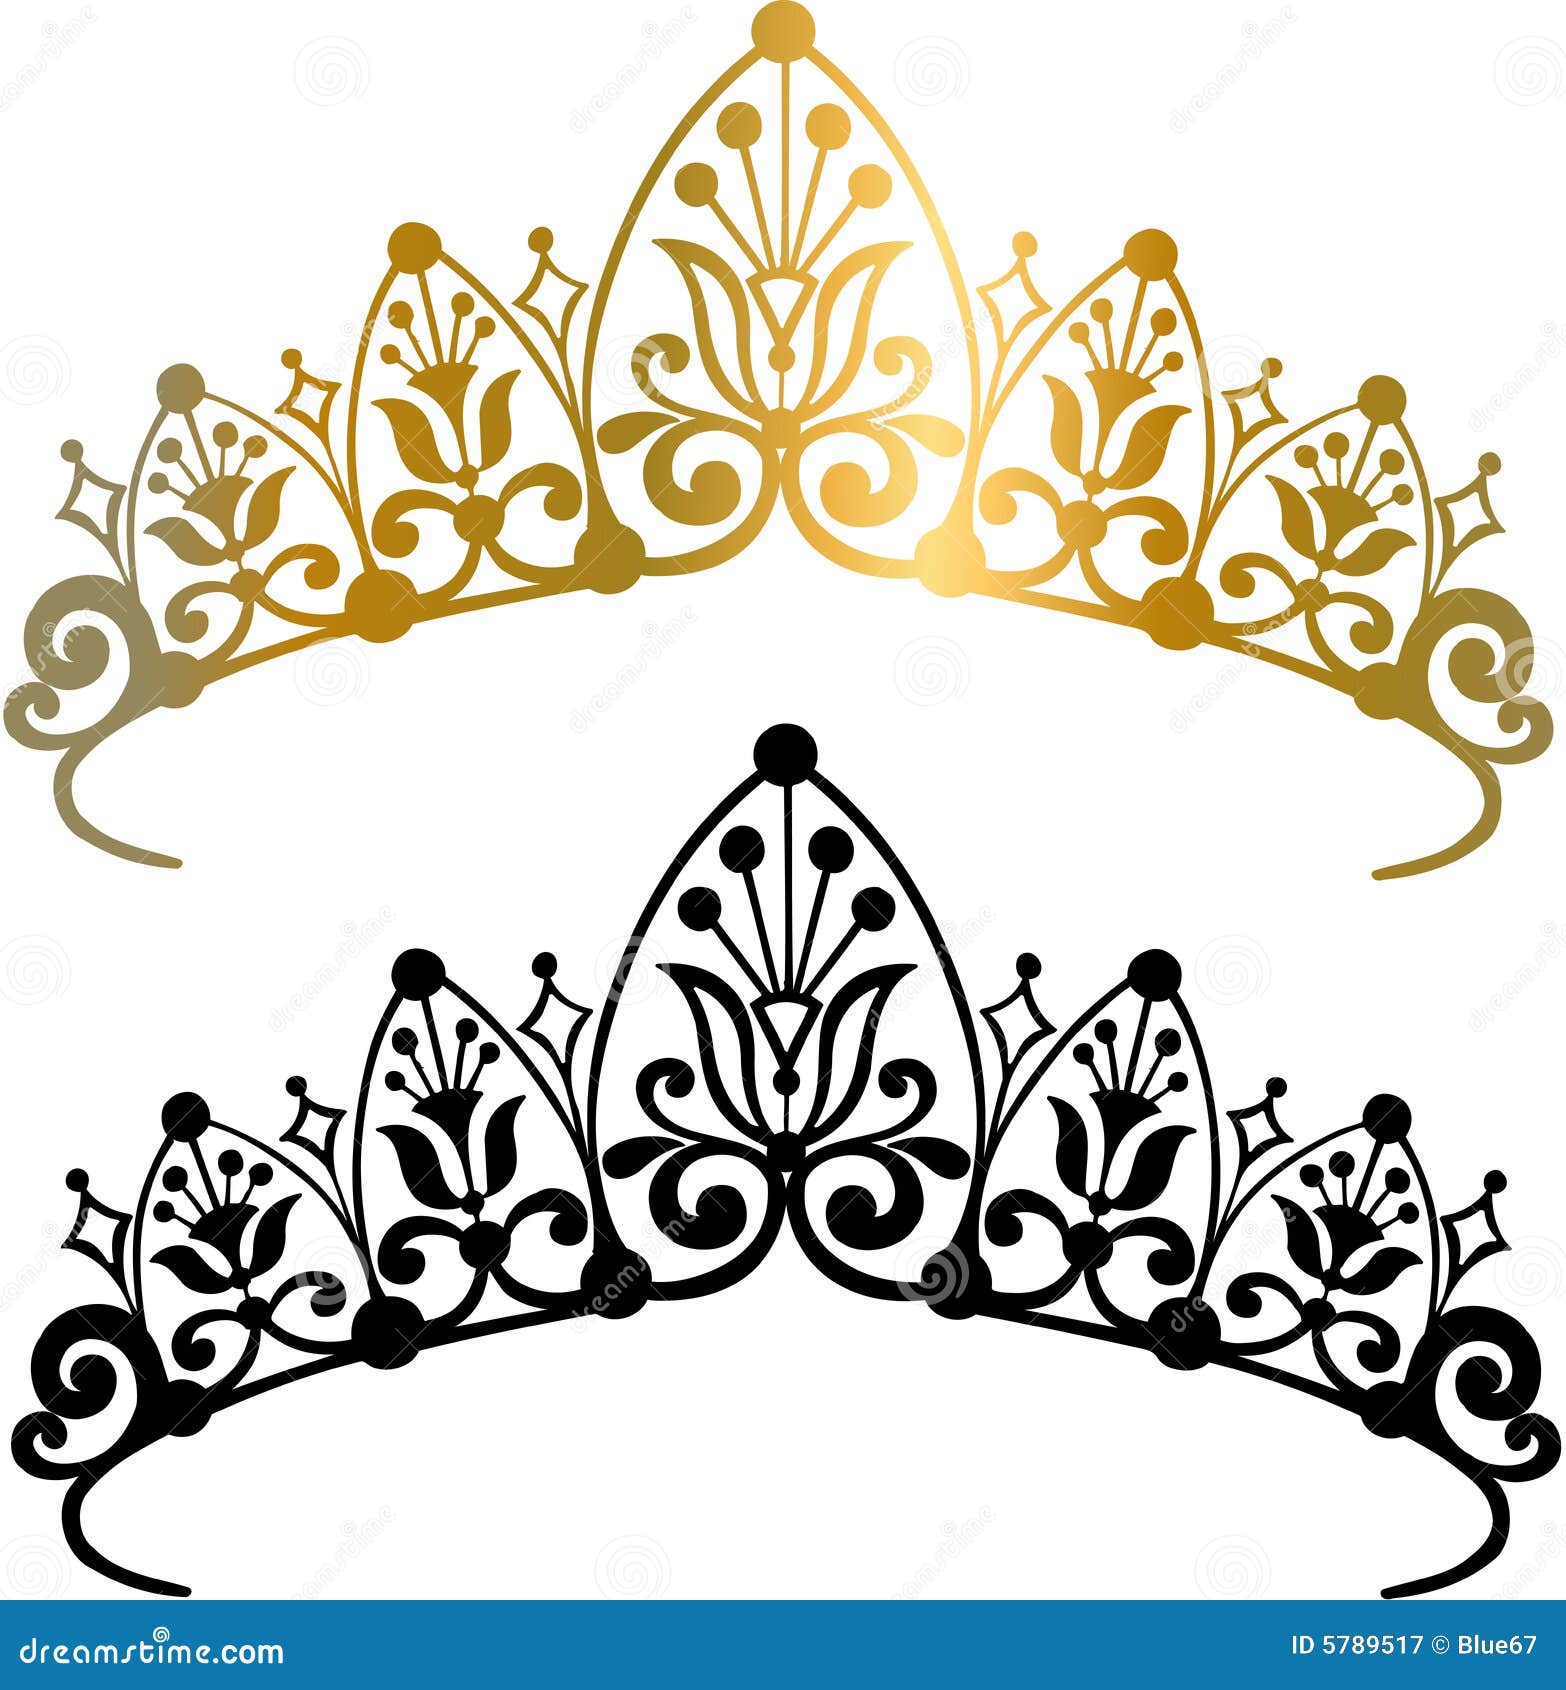 crown clipart vector free - photo #25